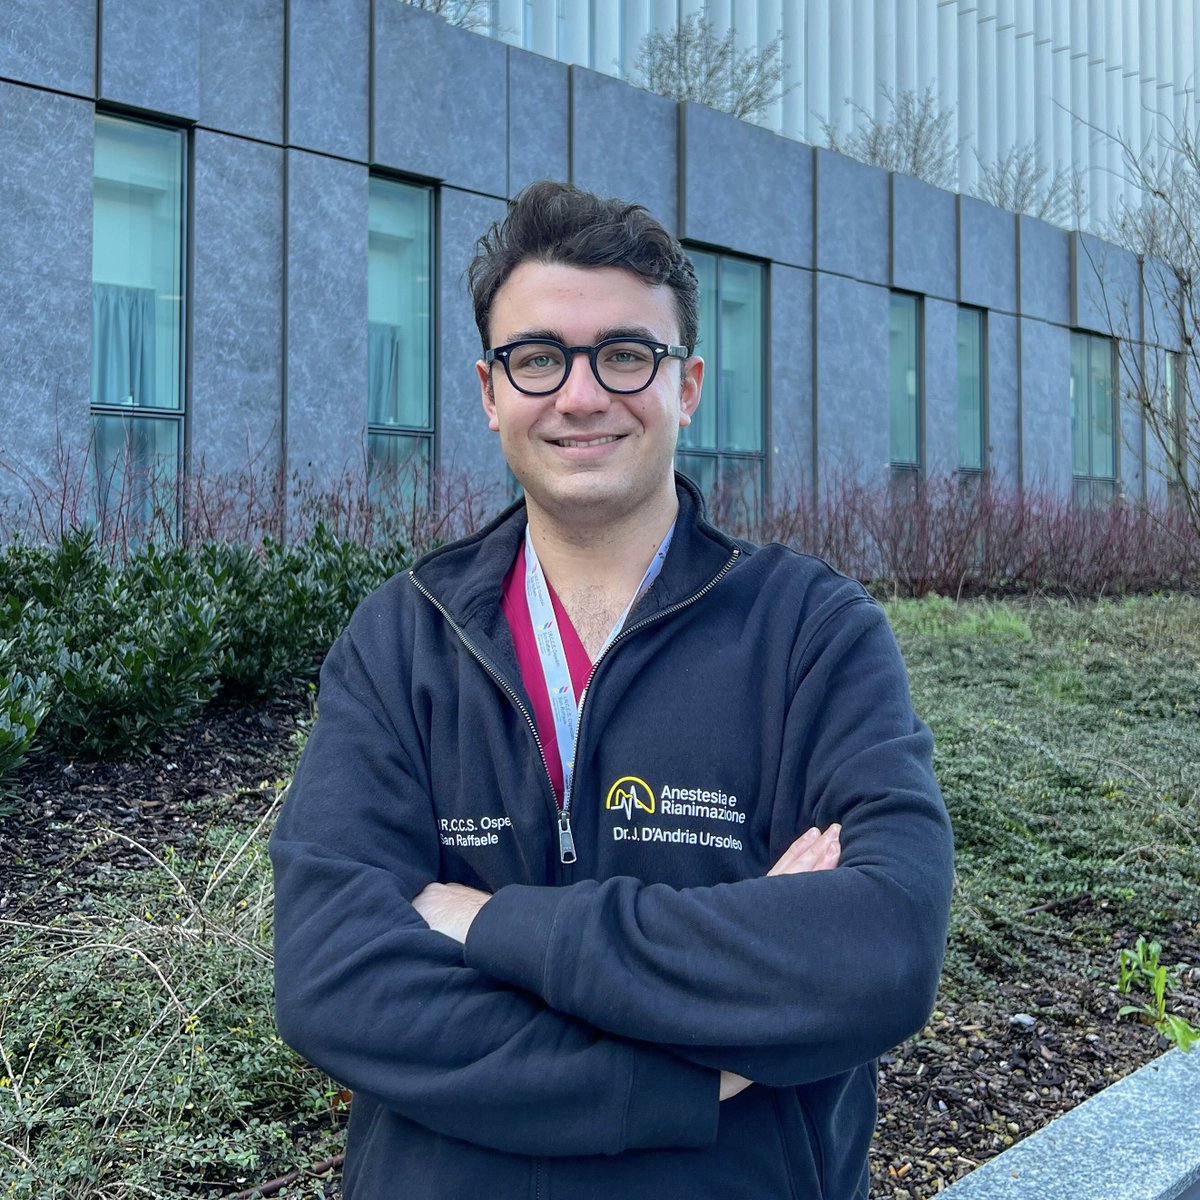 Exciting news! Our Anesthesia and ICU resident @JDAndriaUrsoleo has been appointed as one of the new #SocialMediaFellows for @BJAJournals! He will work alongside the #SoME @_tomabbott to develop innovative content for their platforms! Well done, Jacopo!